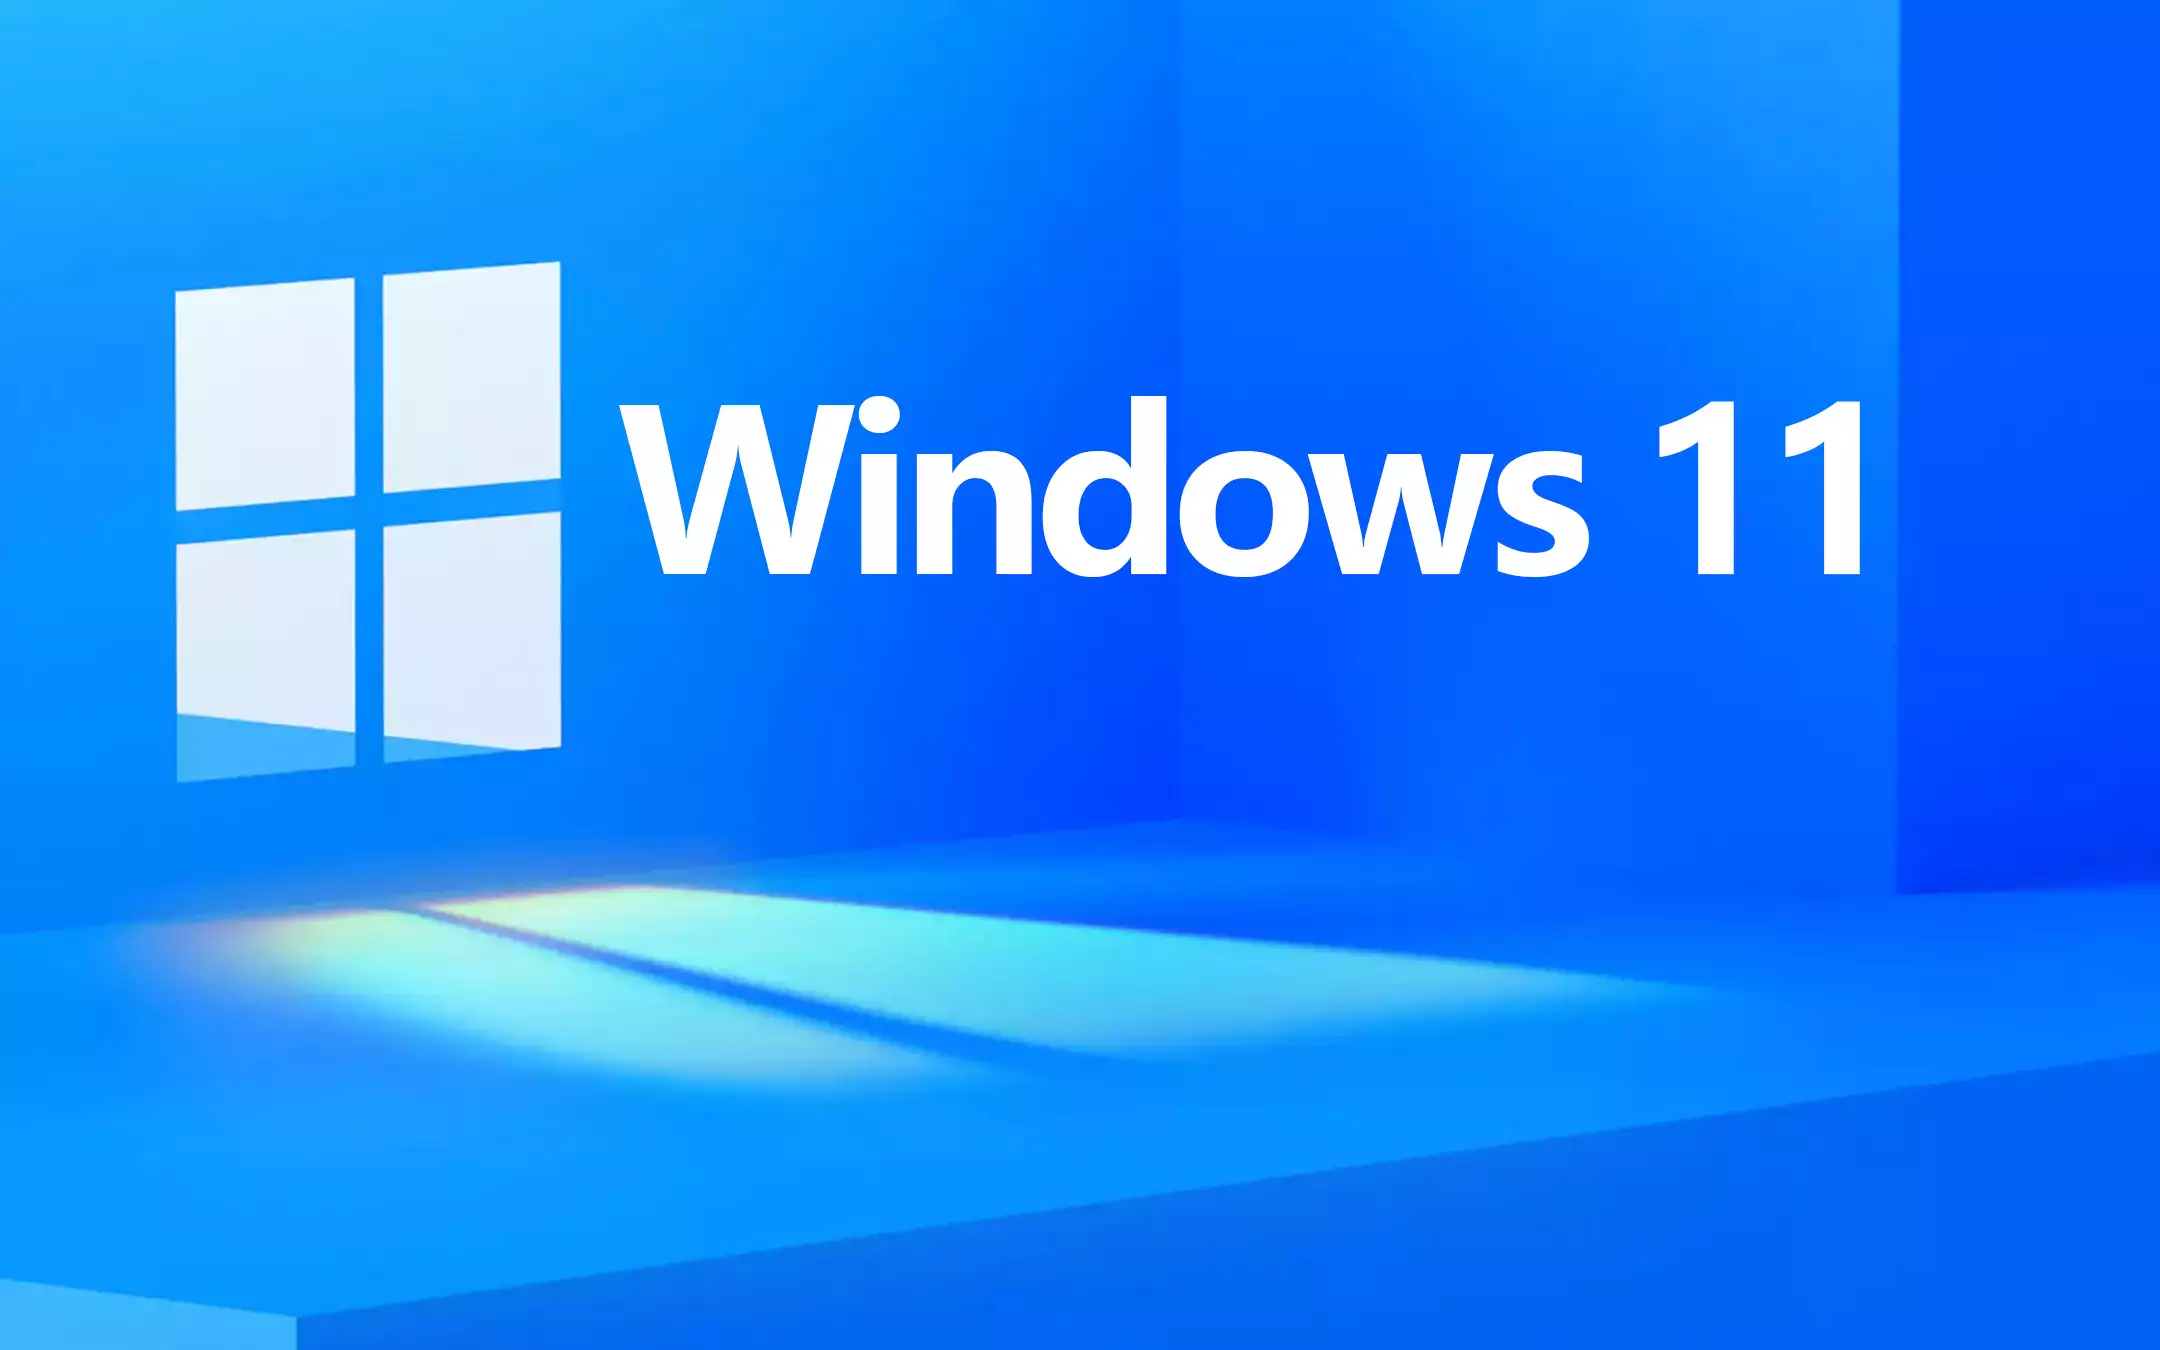 Windows 11 has just been announced